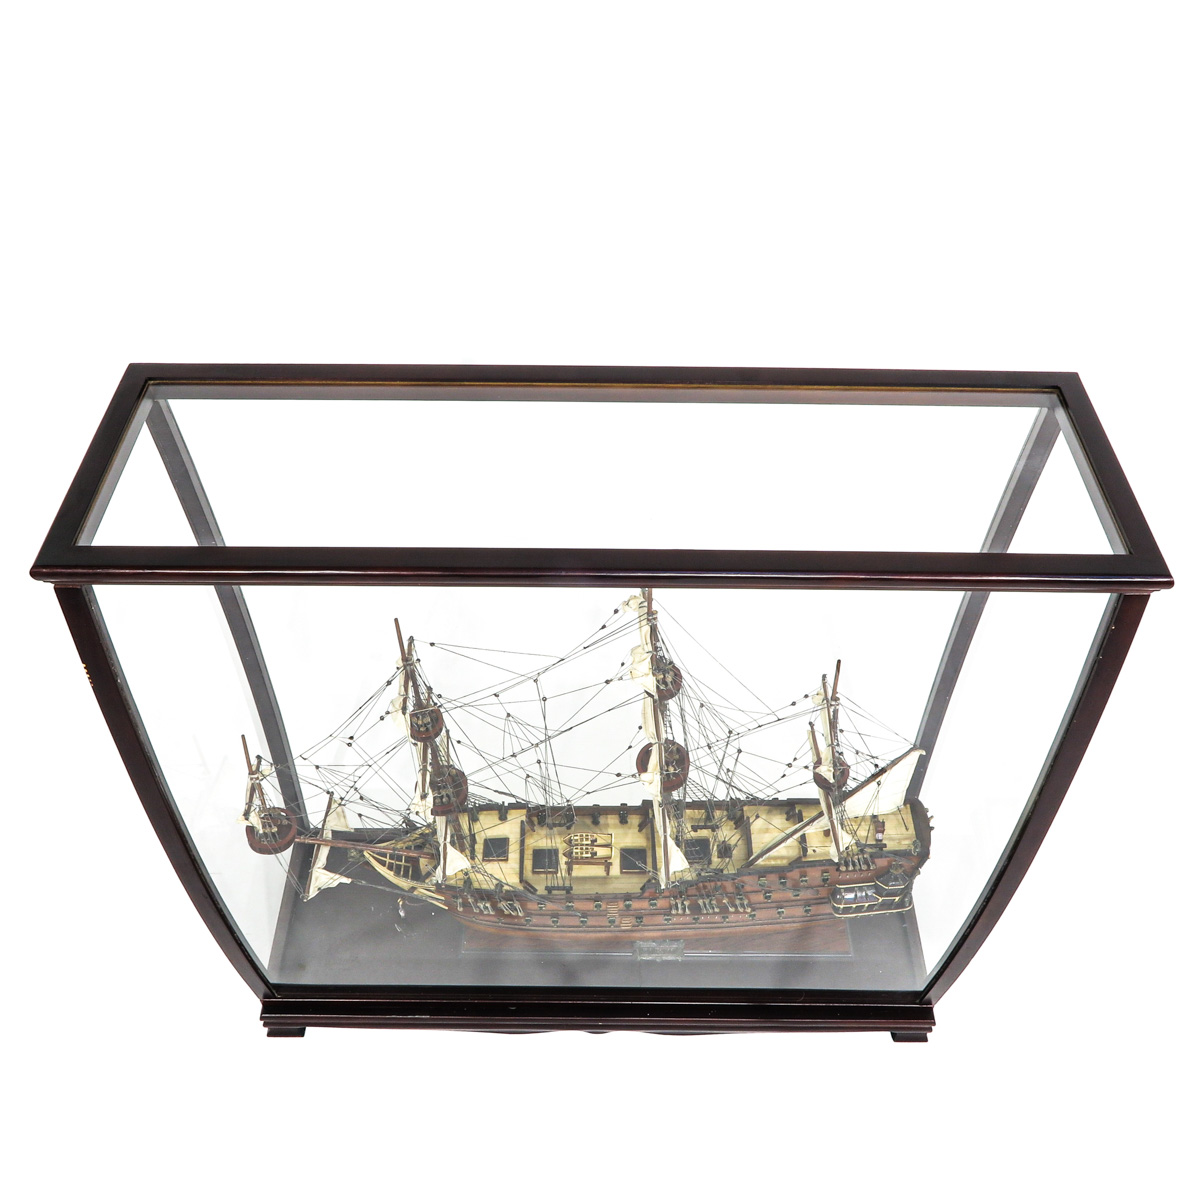 A Model Ship - Image 5 of 10